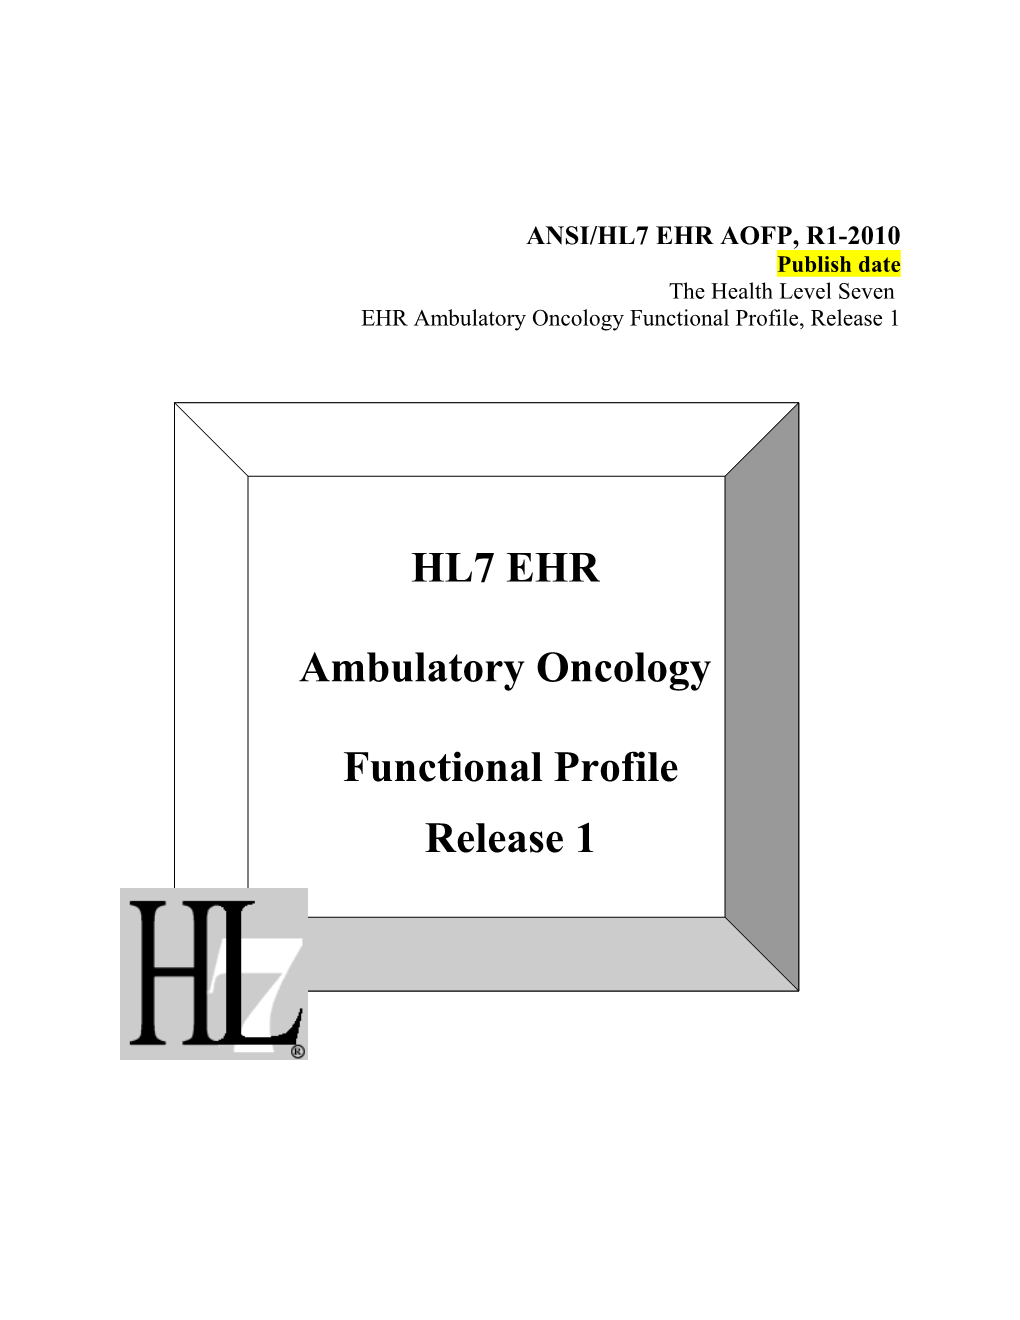 HL7 Oncology EHR Functional Profile